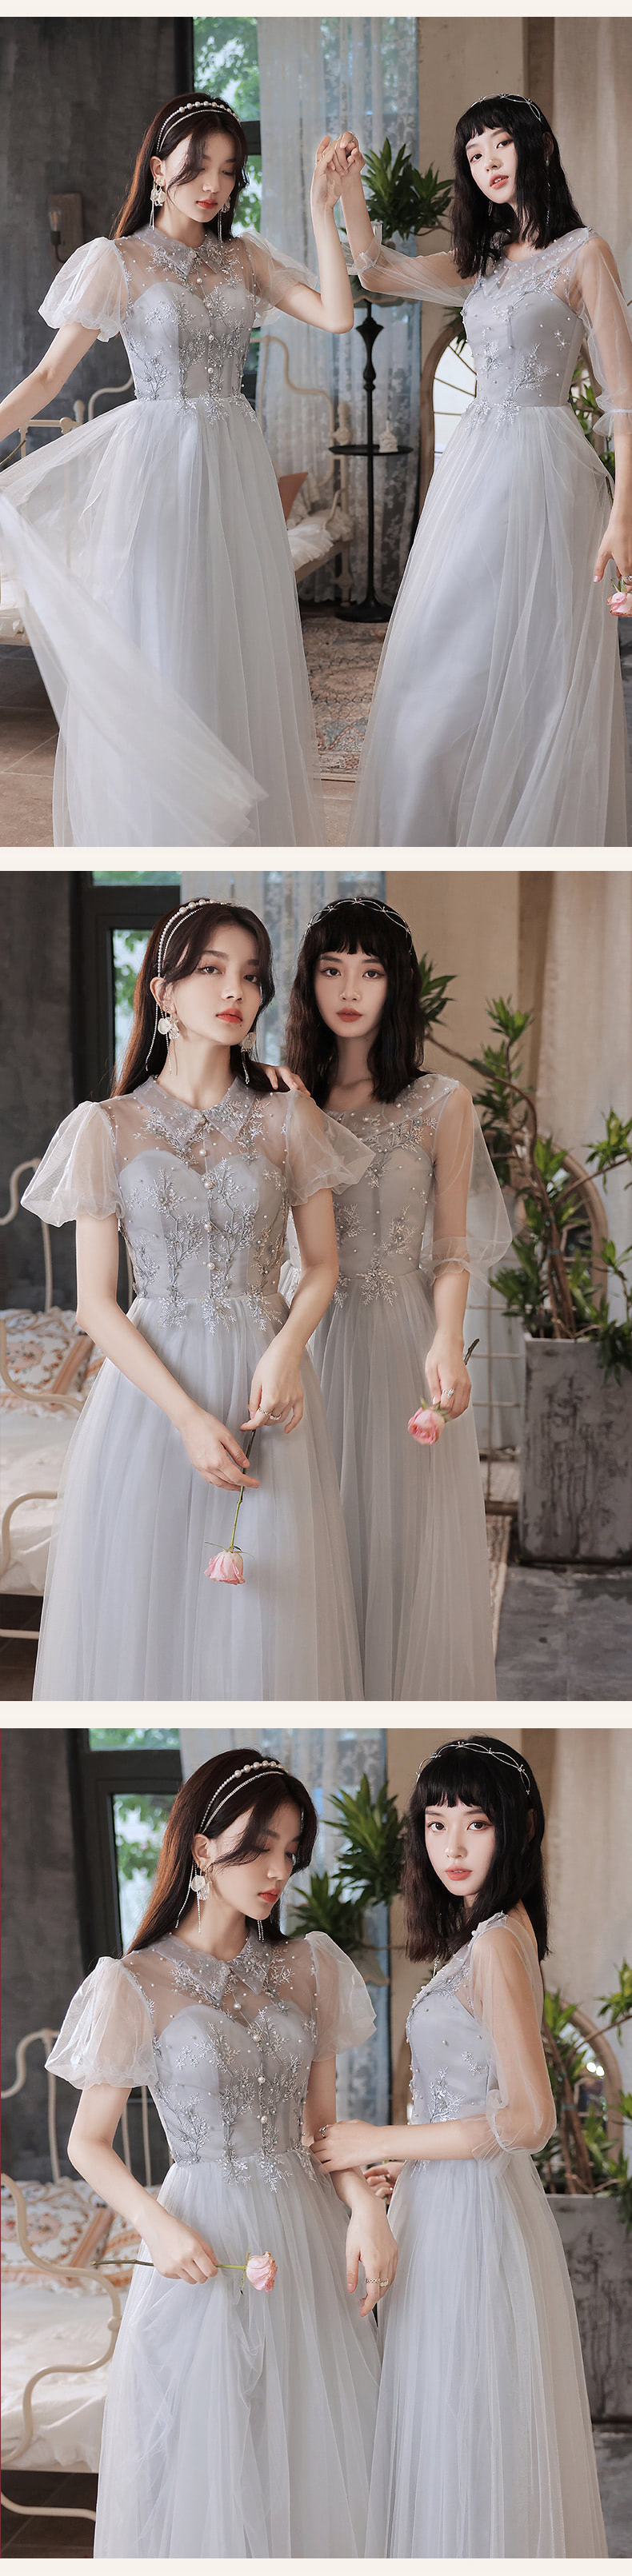 Simple-A-line-Bridal-Party-Gown-Gray-Bridesmaid-Maxi-Dress15.jpg